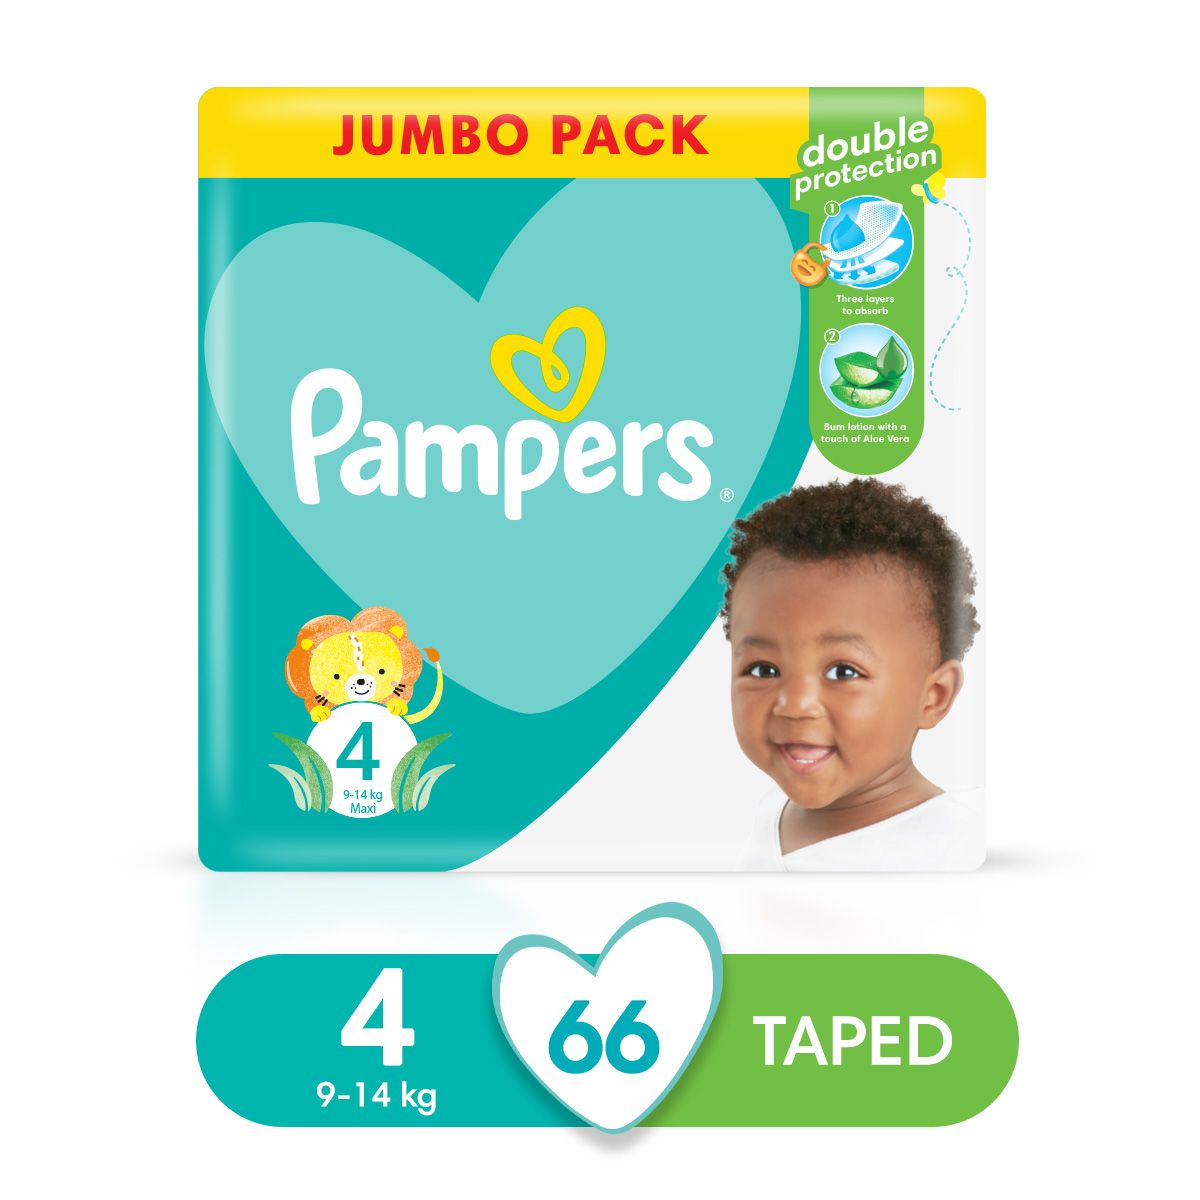 pampers 4+ a happy 4